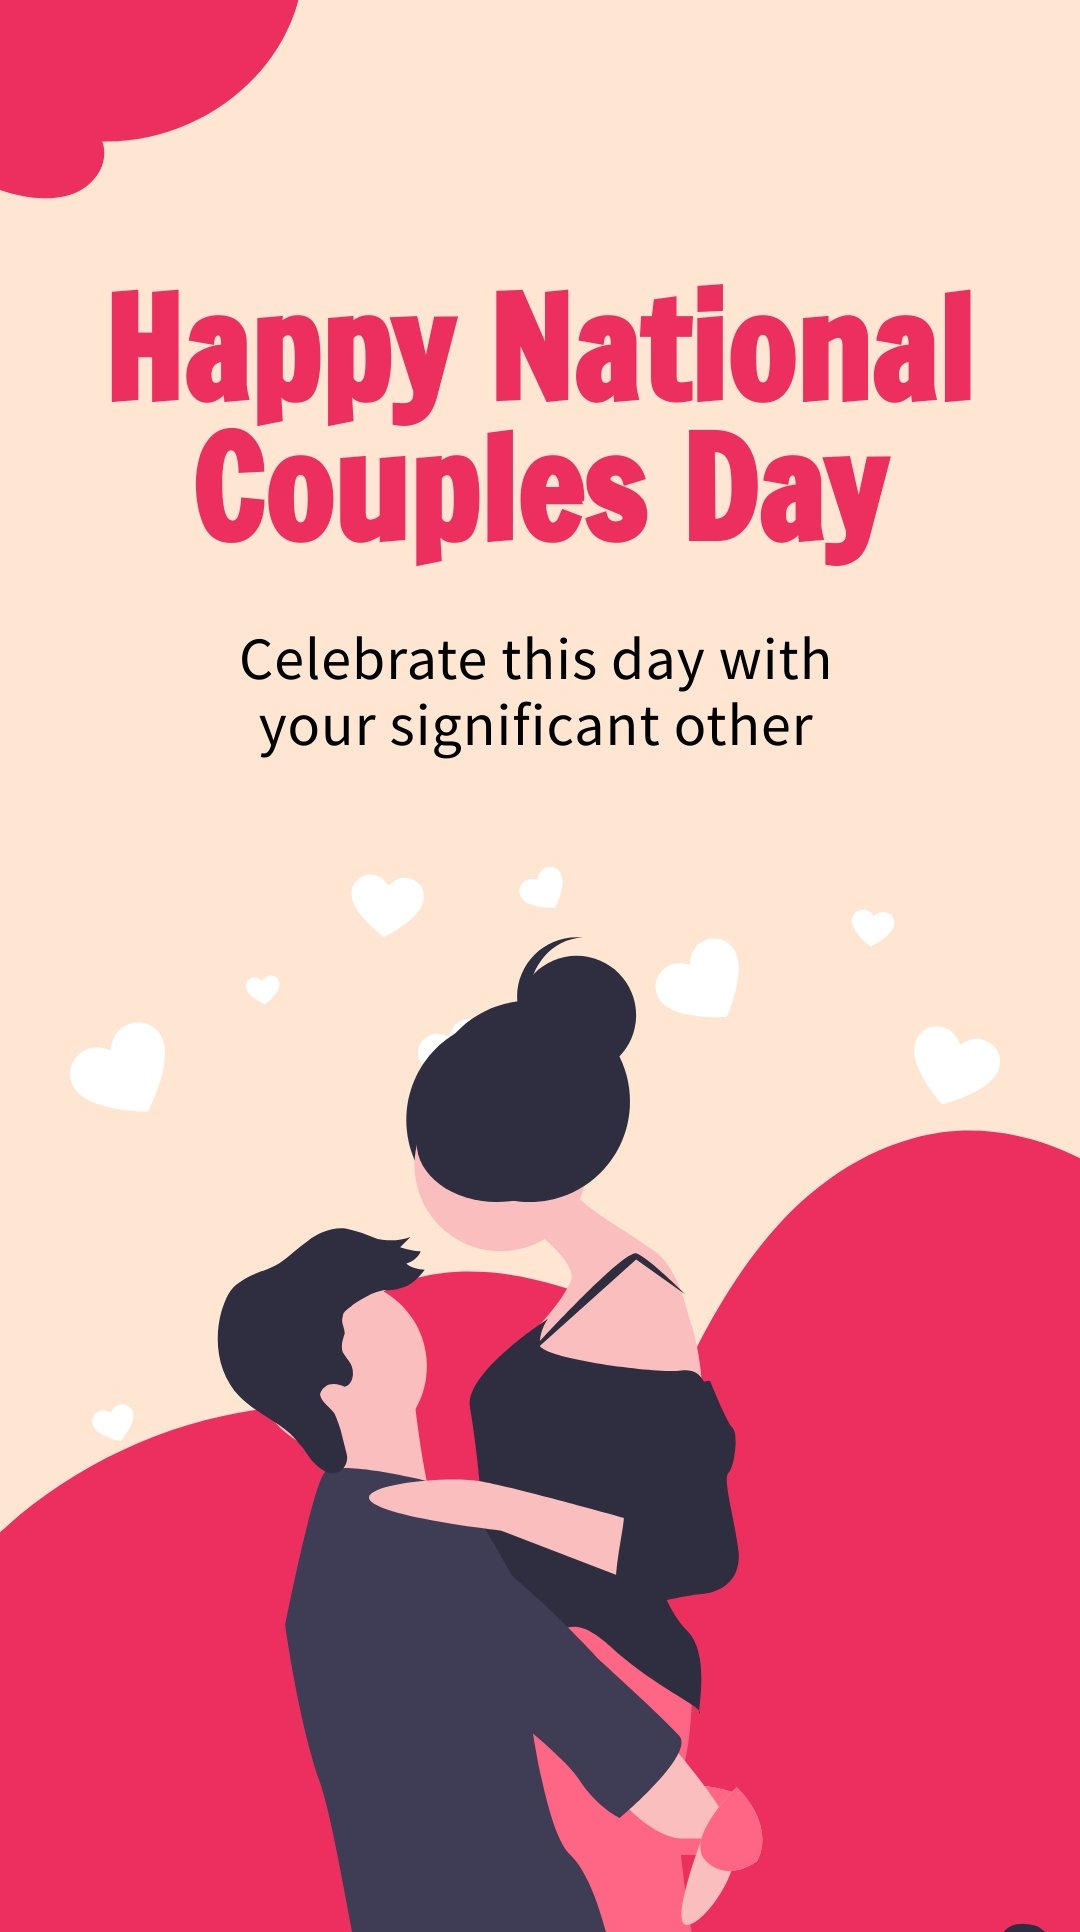 FREE National Couples Day Template Download in Word, Google Docs